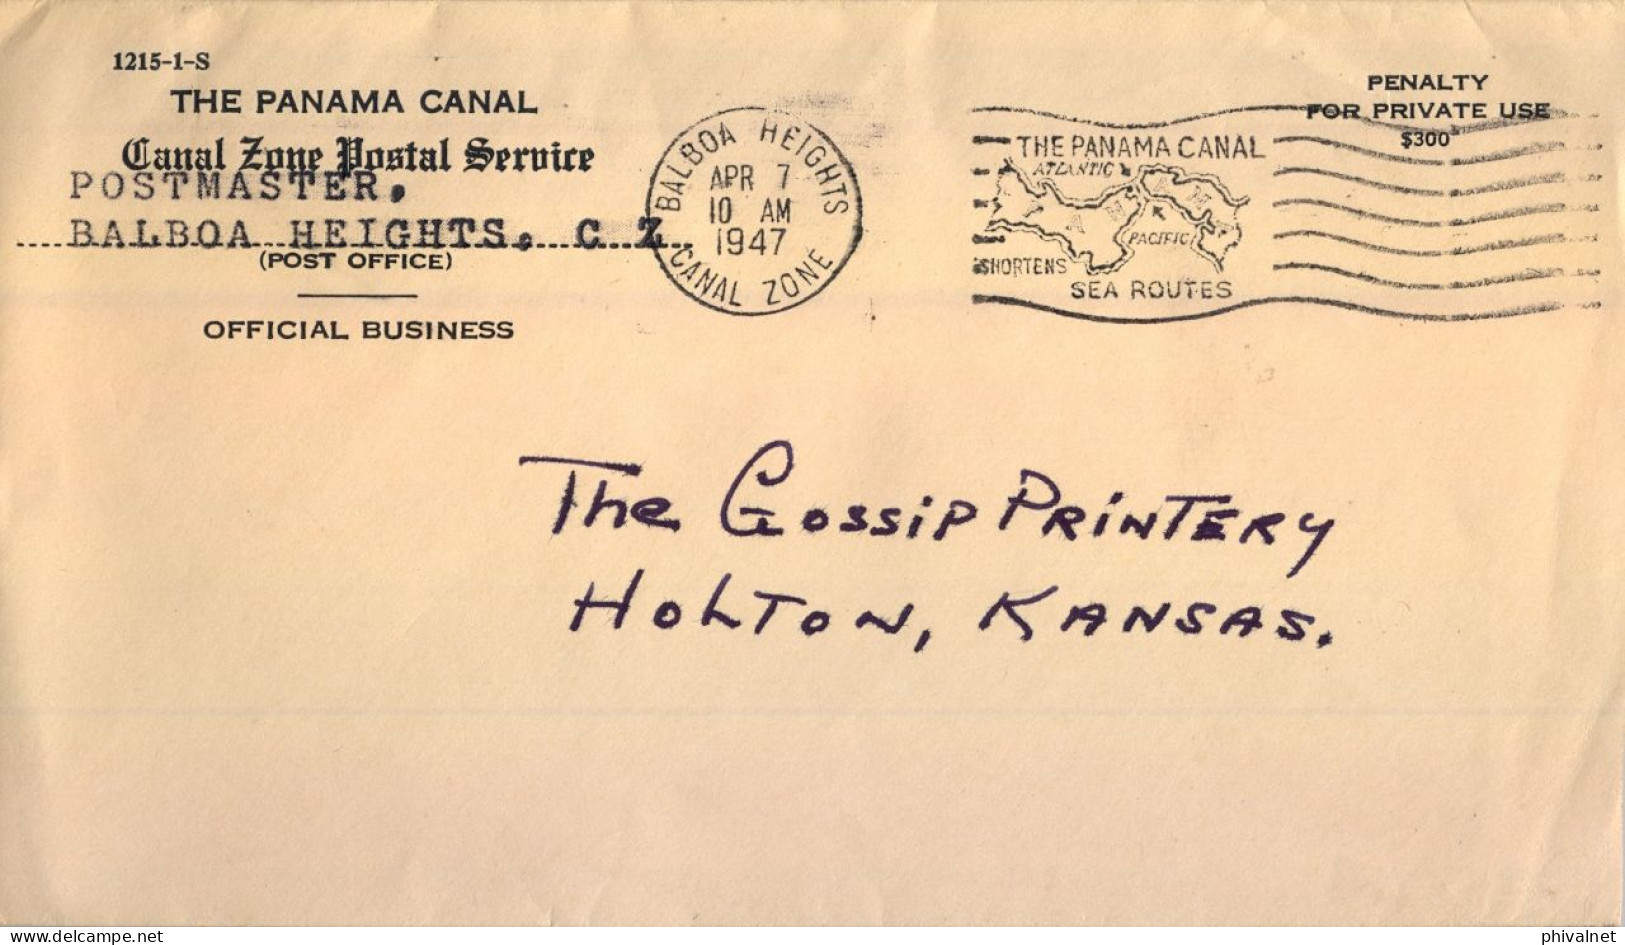 1947 CANAL ZONE , BALBOA HEIGHTS - HOLTON , CANAL ZONE POSTAL SERVICE , POSTMASTER , CORREO OFICIAL - Zona Del Canale / Canal Zone